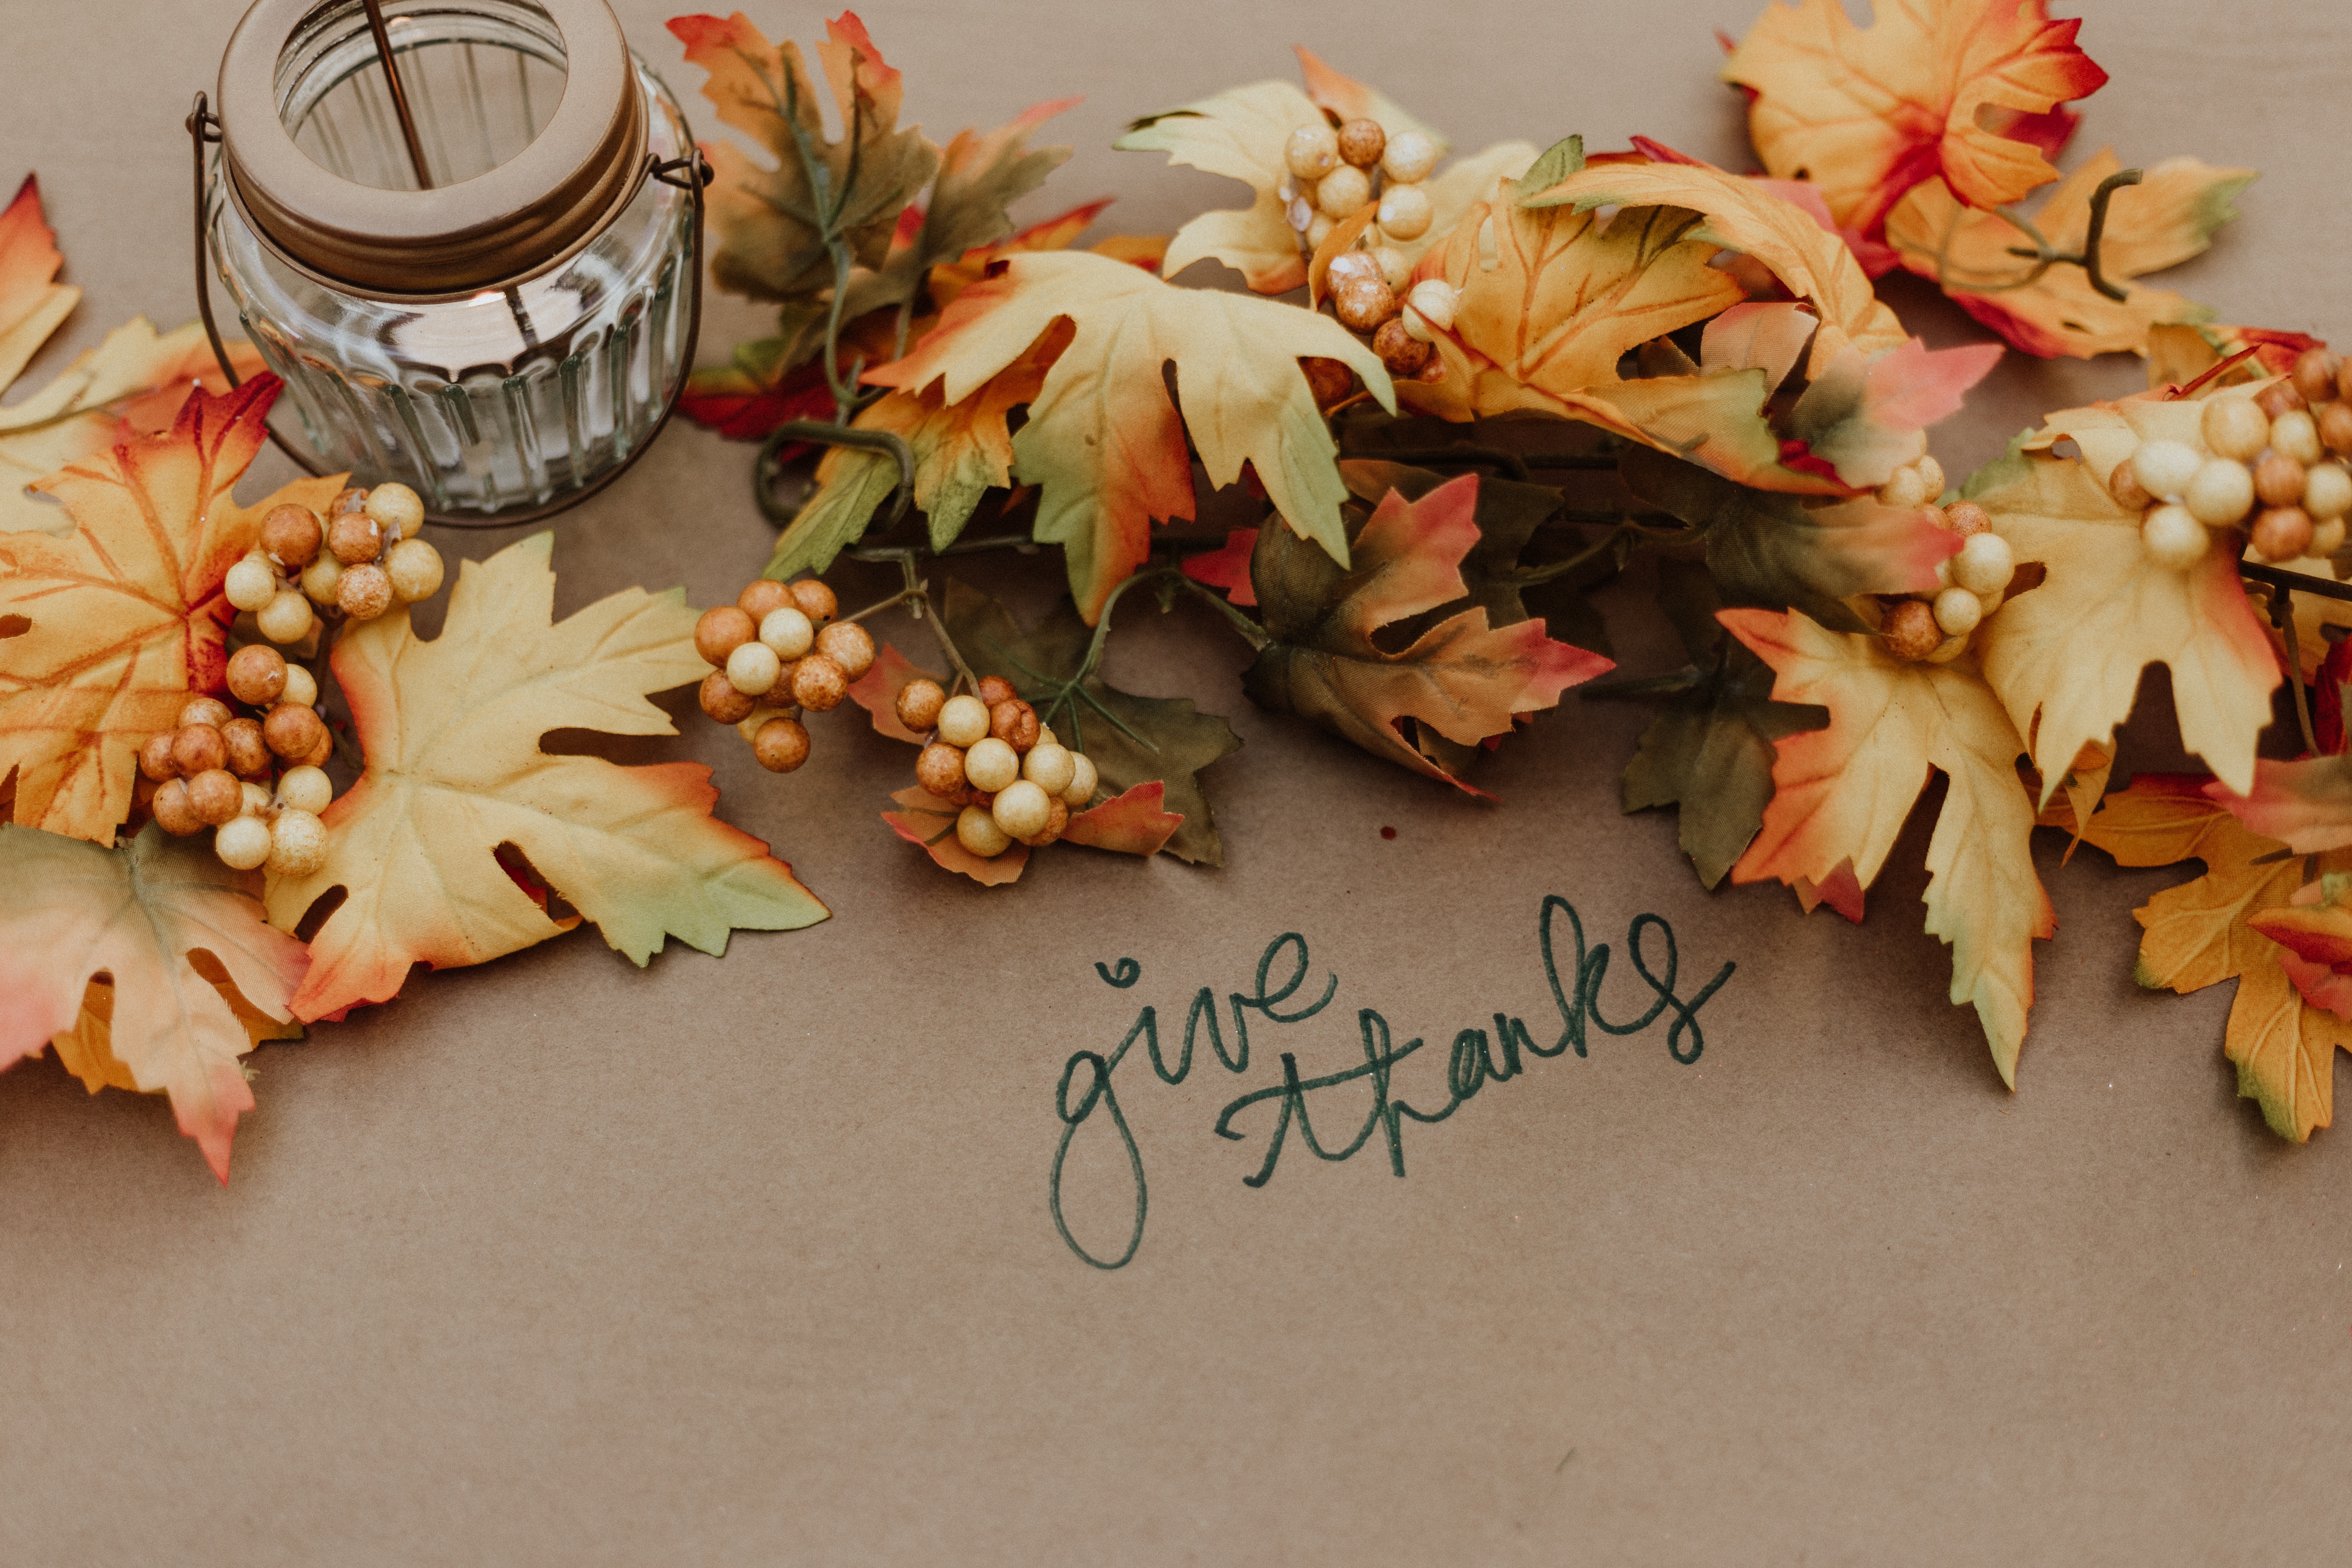 Fall Table Display - Give Thanks Photo by Priscilla Du Preez from Unsplash